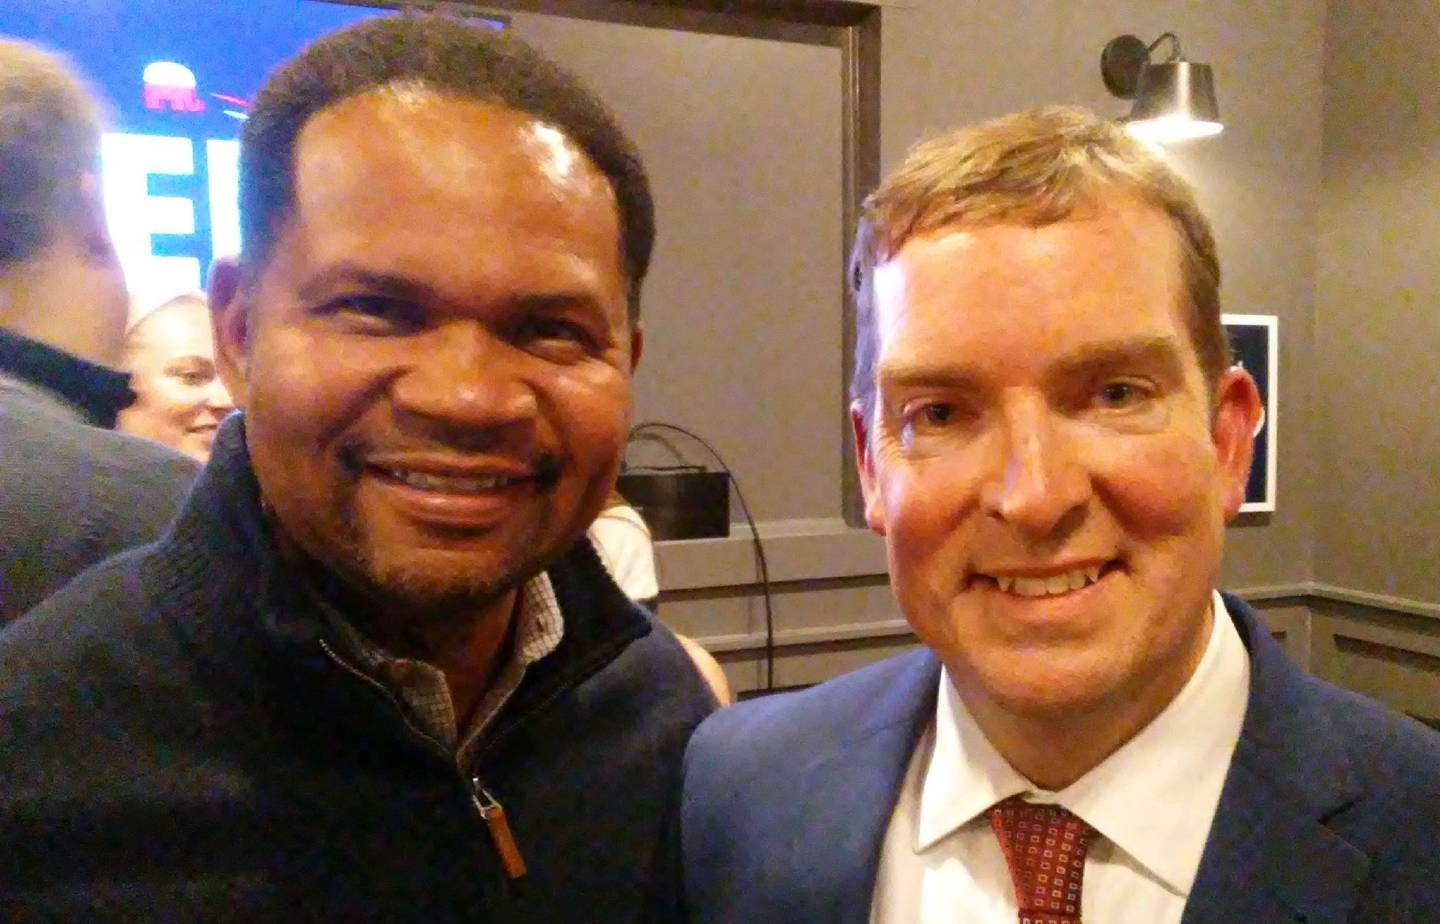 Aurora Mayor Richard Irvin, Republican candidate for Illinois governor, left, is seen here with Kendall County Board Chairman Scott Gryder, who announced his candidacy for Congress on Feb. 24 at a Yorkville restaurant.